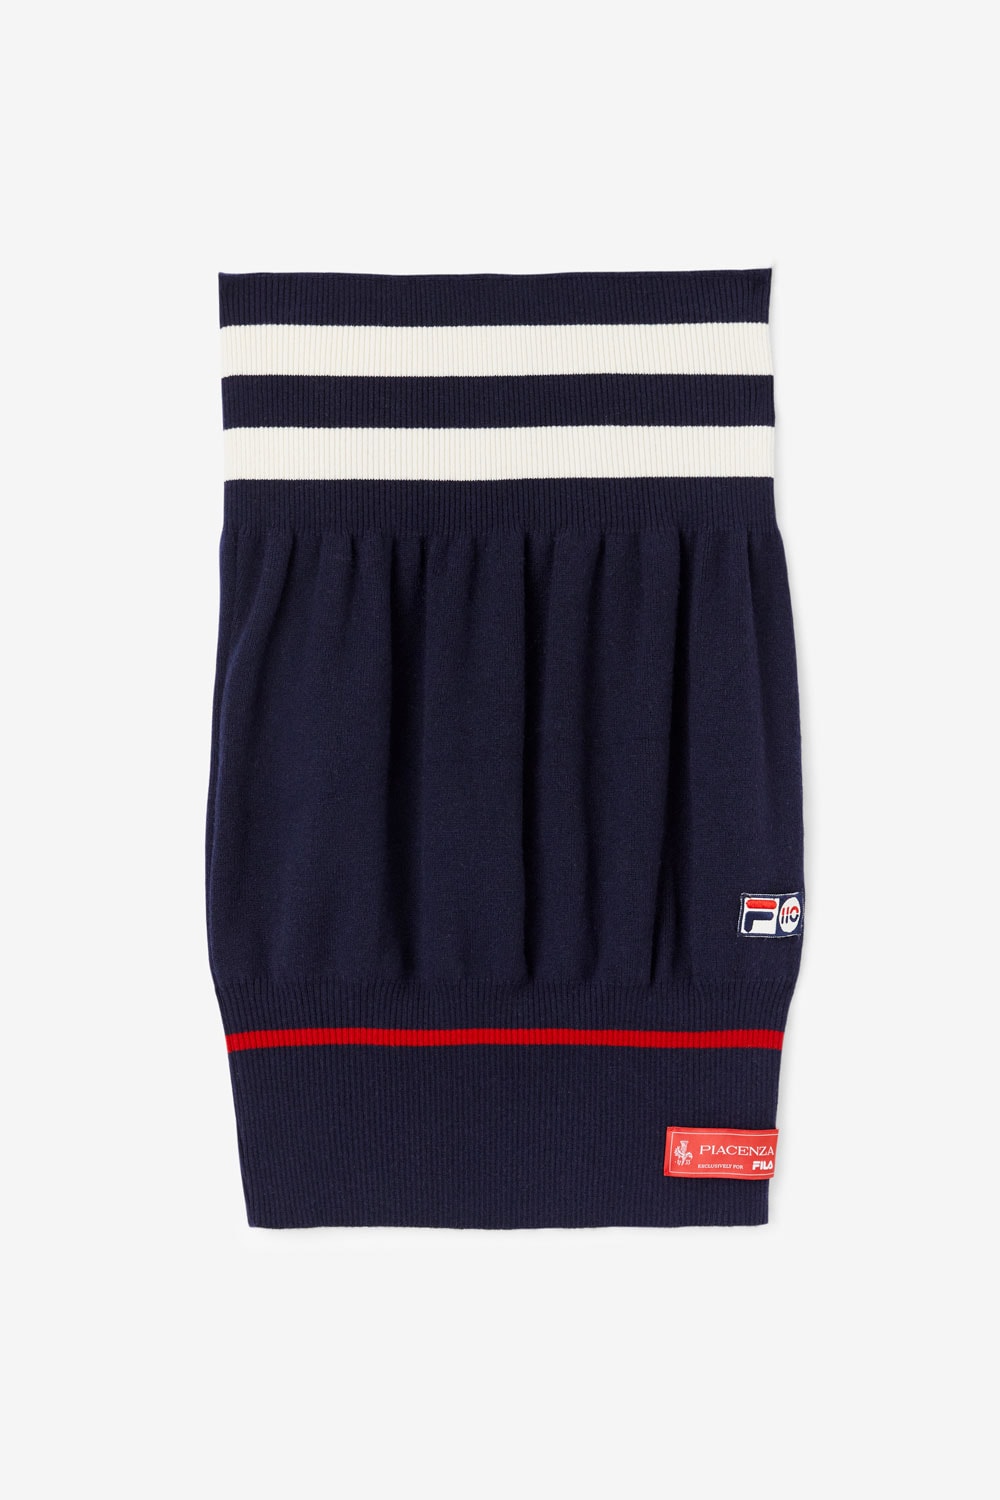 fila piacenza cashmere exclusive limited special edition anniversary collection knitwear wool unisex winter beanie women’s girdle skirt the argyle snow time white rock sweaters